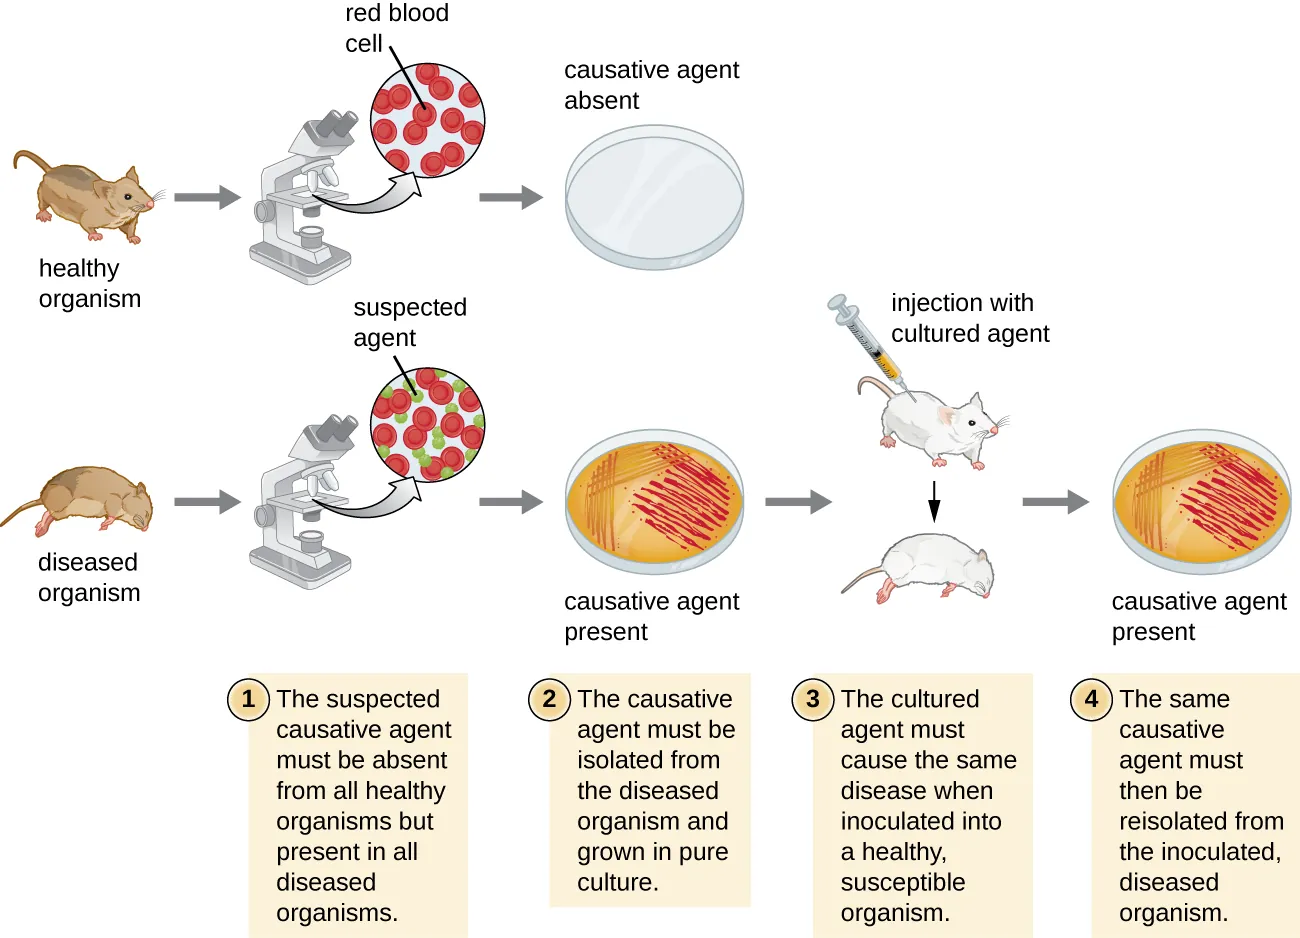 A diagram Koch’s postulates. 1 – The suspected causative agent must be absent from all healthy organisms but present in all diseased organisms. This is demonstrated by looking at slides under a microscope from a sick mouse and seeing the suspected agent. A slide from a healthy mouse only shows healthy red blood cells. 2 – The causative agent must be isolated from the diseased organism and grown in pure culture. This is demonstrated by showing grown on a petri plate from the sick mouse and no growth from the healthy mouse.  3 – The cultured agend must cause the same disease when inoculated into a healthy, susceptible organism. This is demonstrated by injecting a healthy mouse with the cultured agent and having that mouse get sick. 4 – The same causative agent must then be reisolated from the inoculated diseased organism. This is demonstrated by a petri plate from this last mouse showing growth of the causative agent.